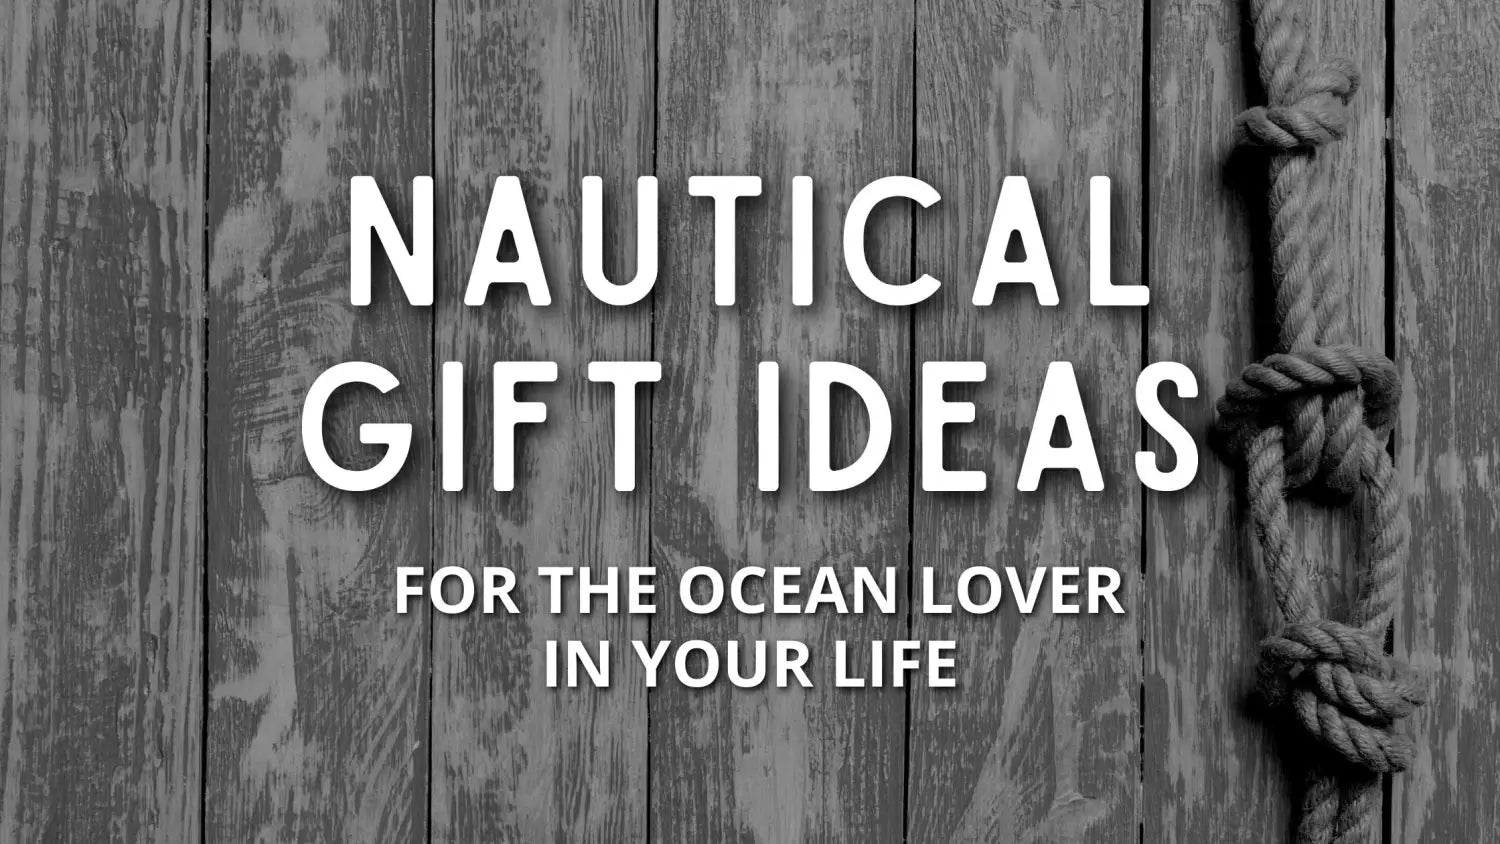 Nautical gift ideas for the ocean lover in your life